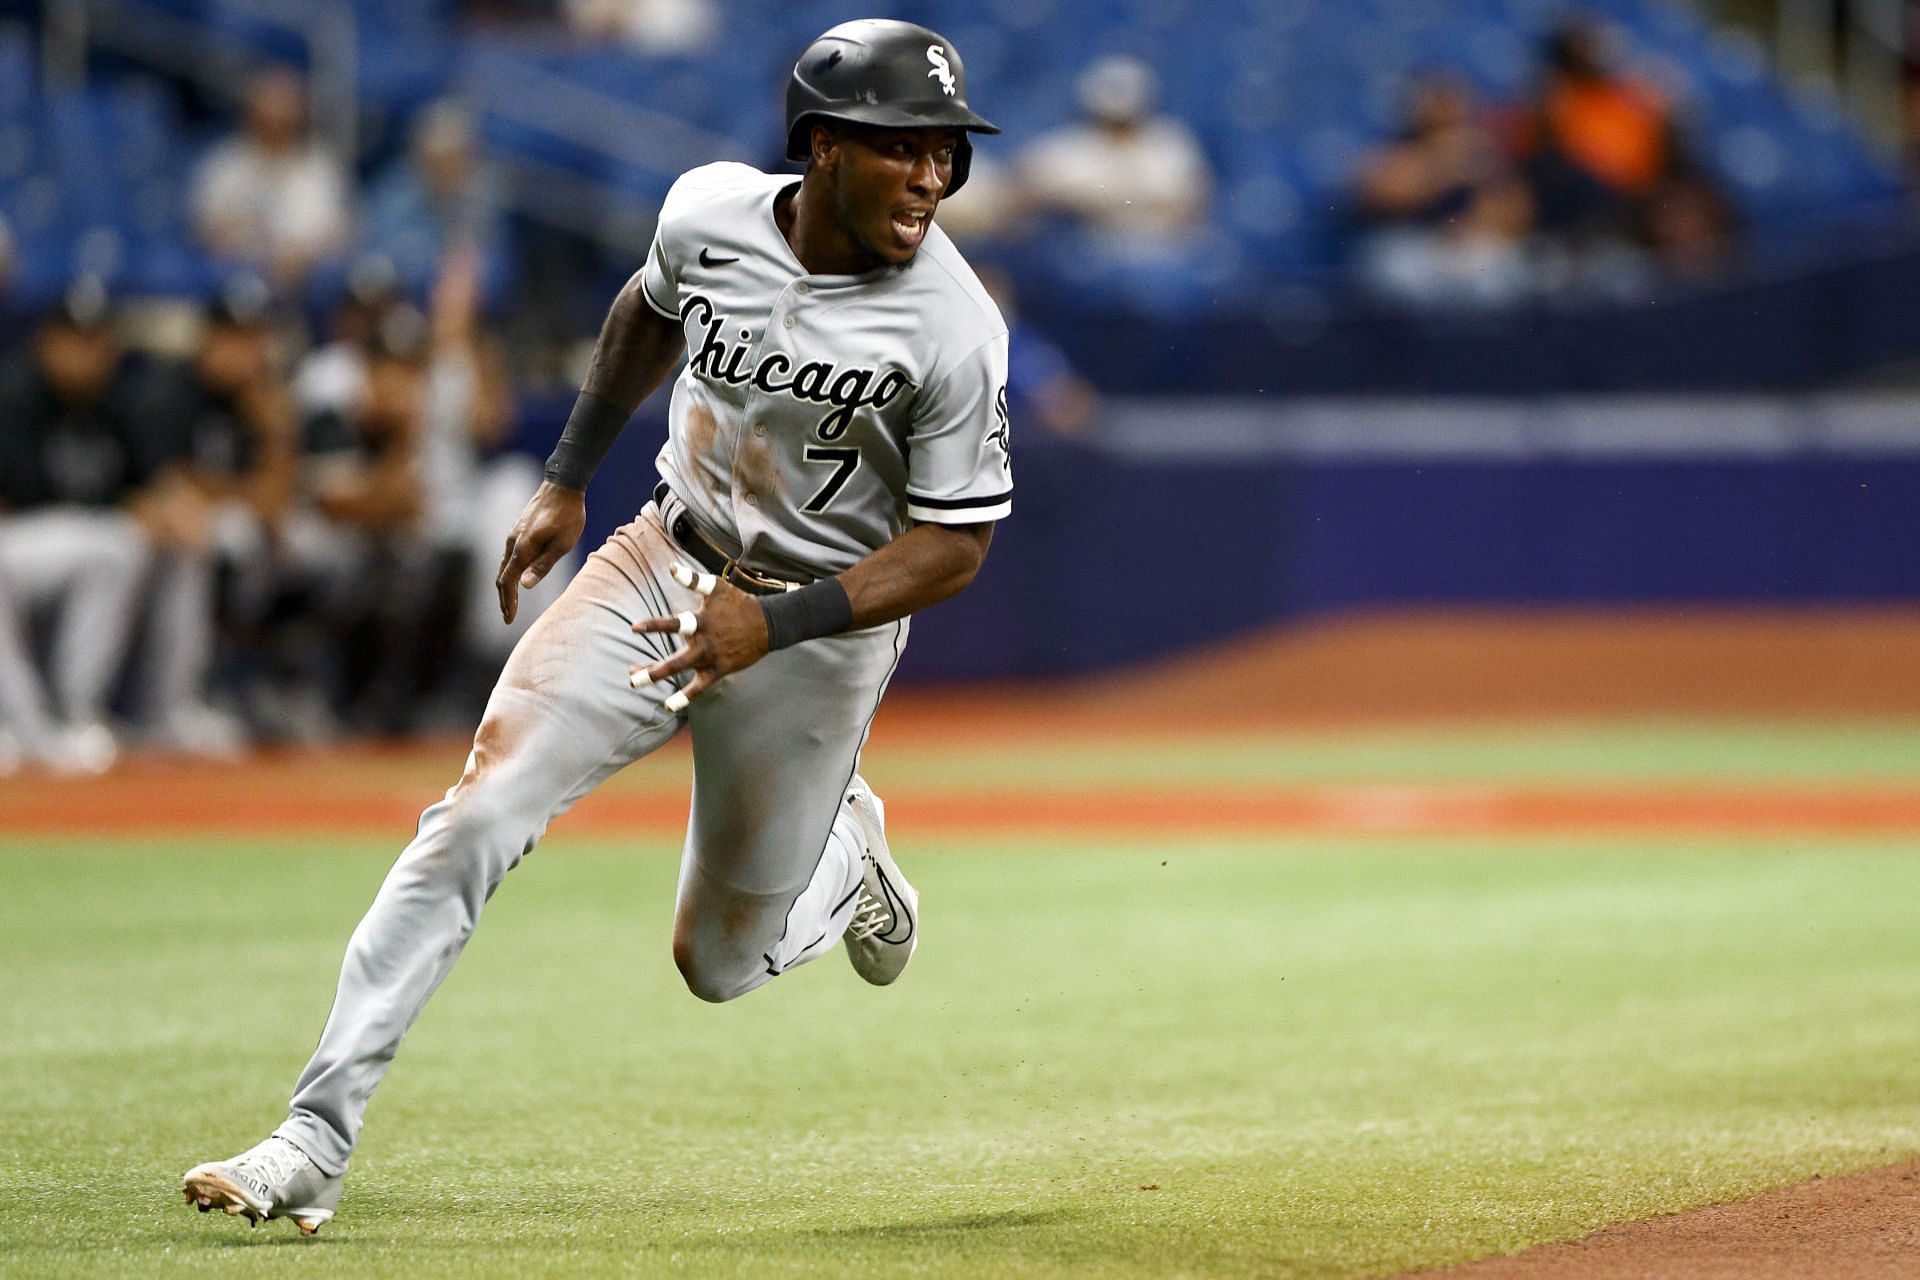 Tim Anderson: Tim Anderson's personal pledge to protect his Illegitimate  son from a fatherless upbringing: I know what it feels like not having  your dad around